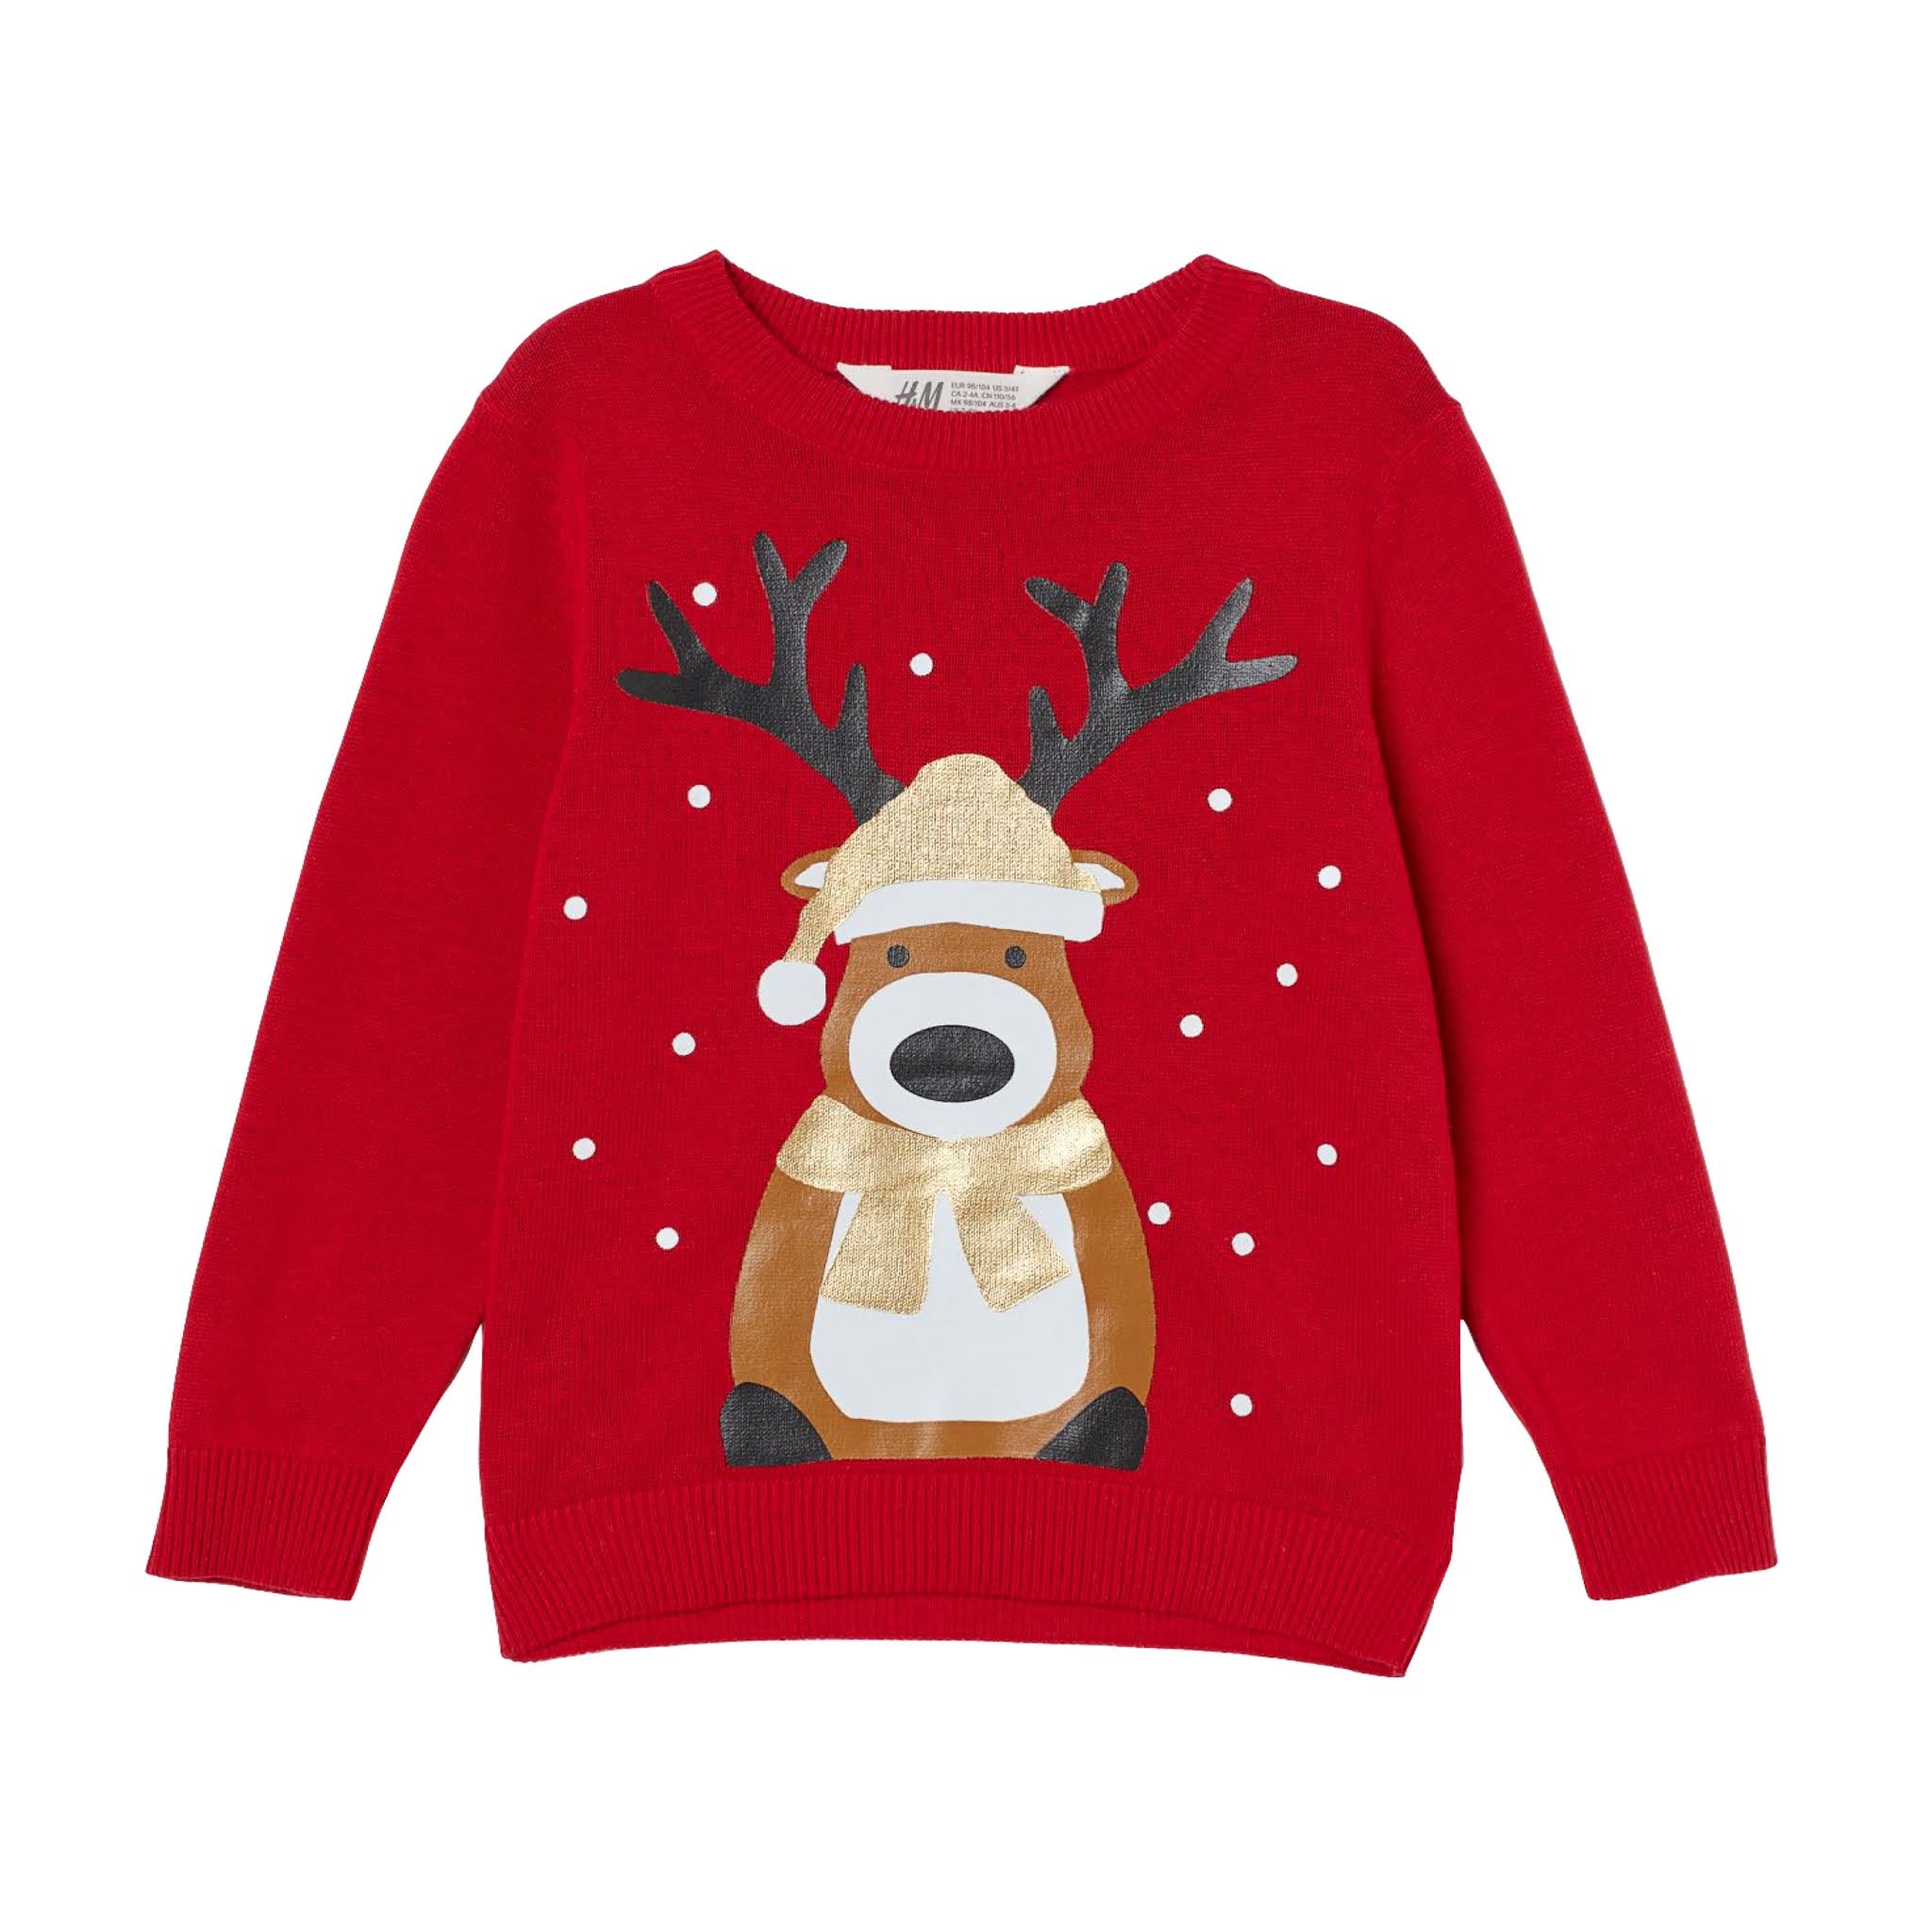 Kids Red Reindeer Sweater from H&M Kids